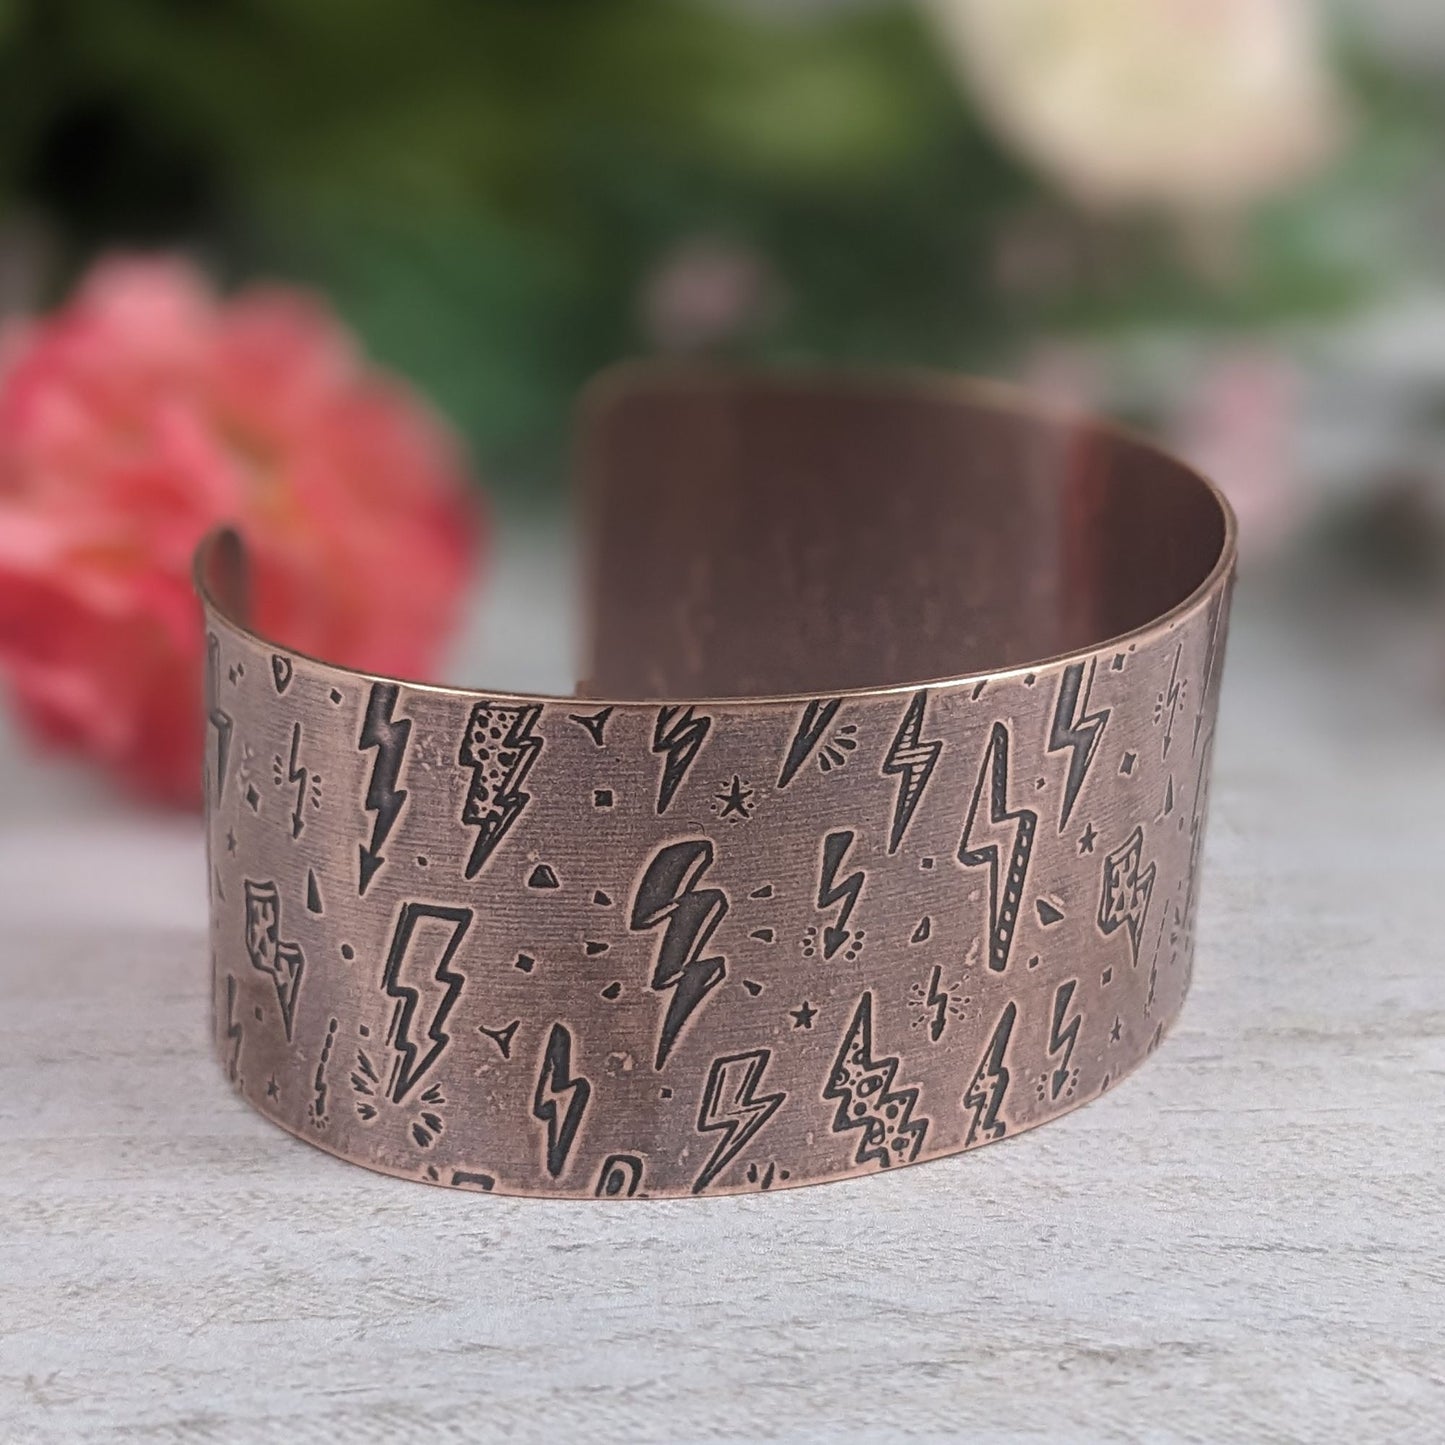 One inch wide copper cuff bracelet with an impressed pattern of assorted cartoon style lightning bolts. The bolts are darkened to accentuate the details.